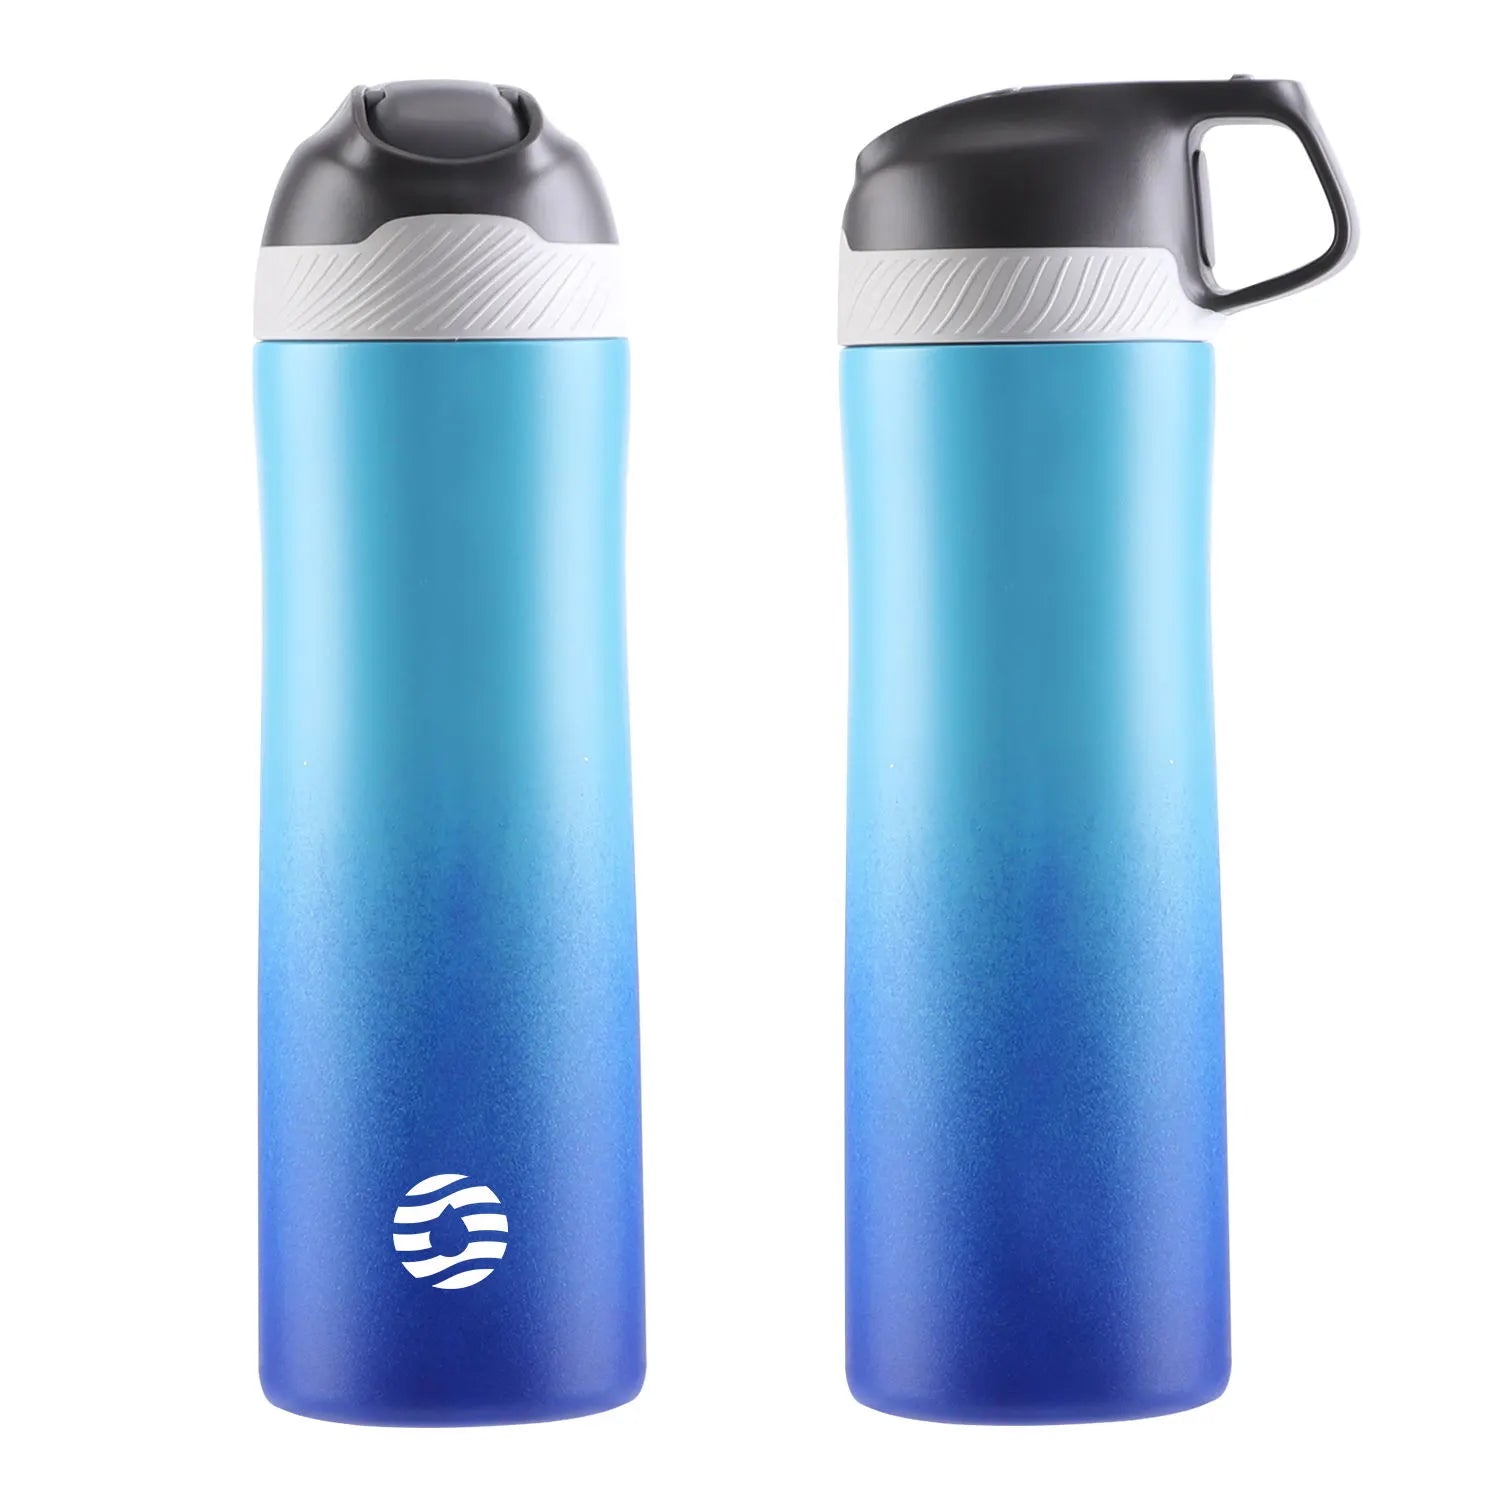 FEIJIAN Insulated Water Bottle with Straw Lid - Double Wall Thermos, Stainless Steel, Keeps Hot and Cold for School, Sports, Travel Gradient Blue 550ml / 550-710ml / CHINA